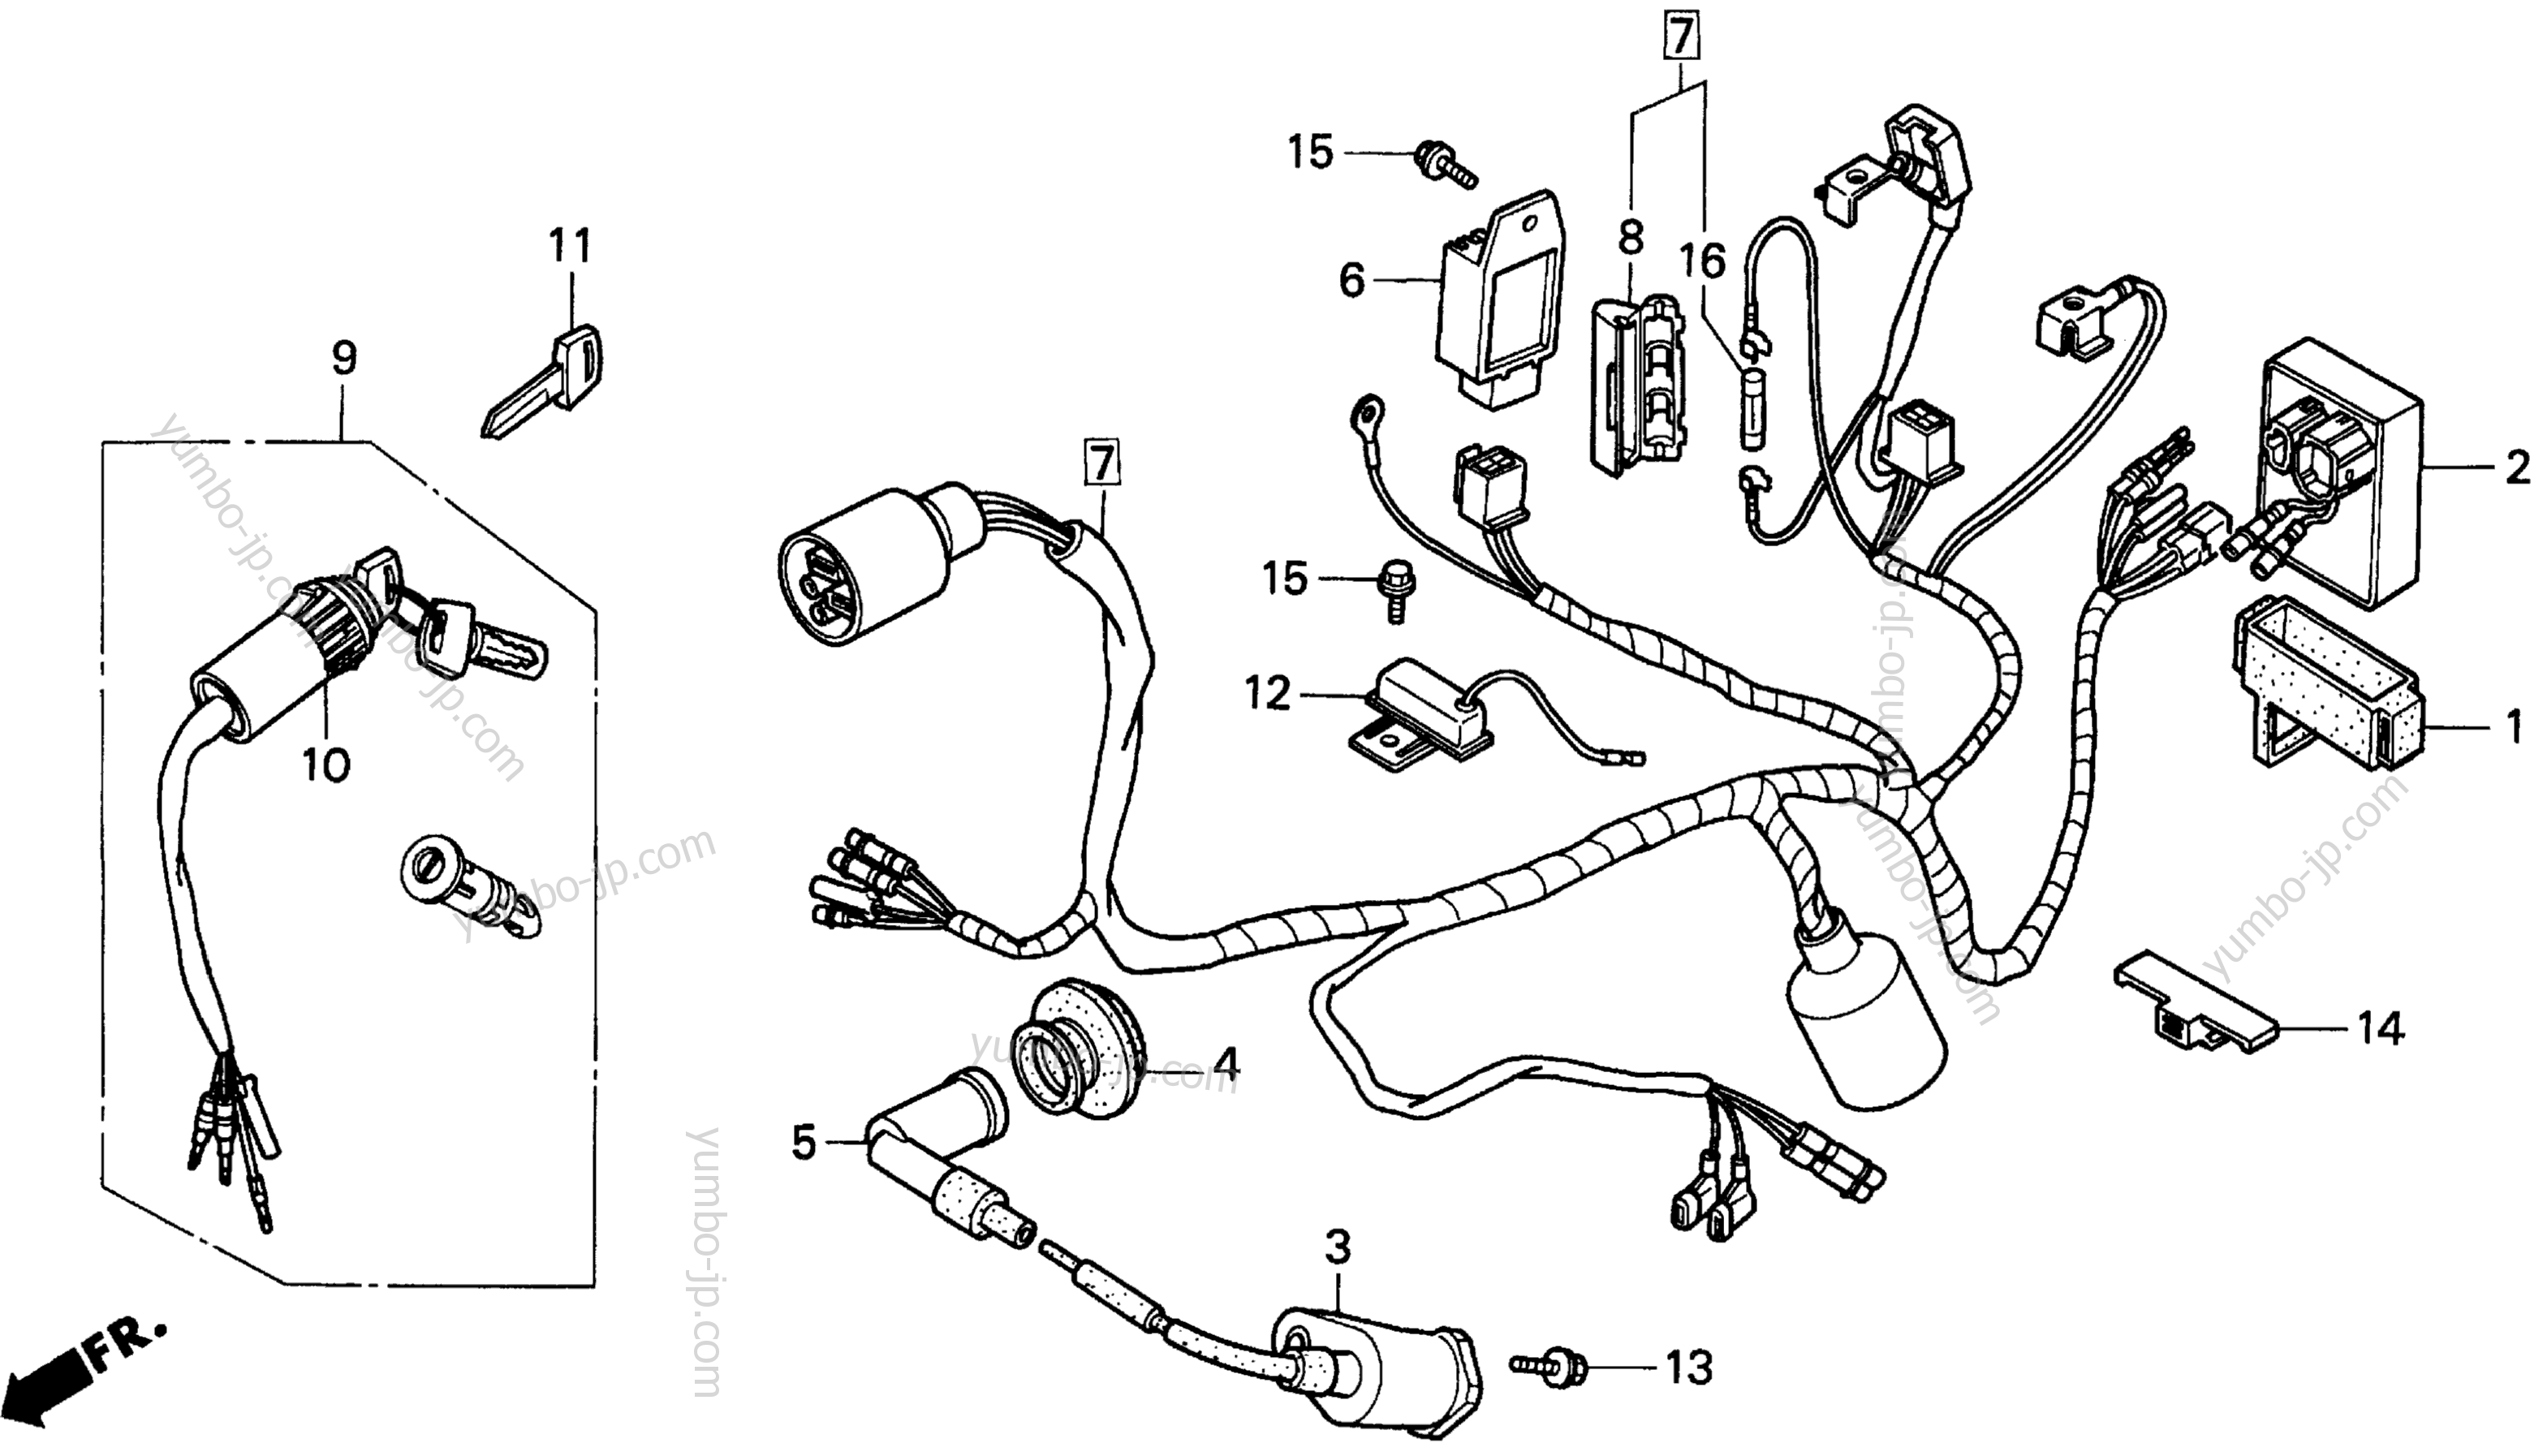 WIRE HARNESS for motorcycles HONDA EZ90 A 1992 year